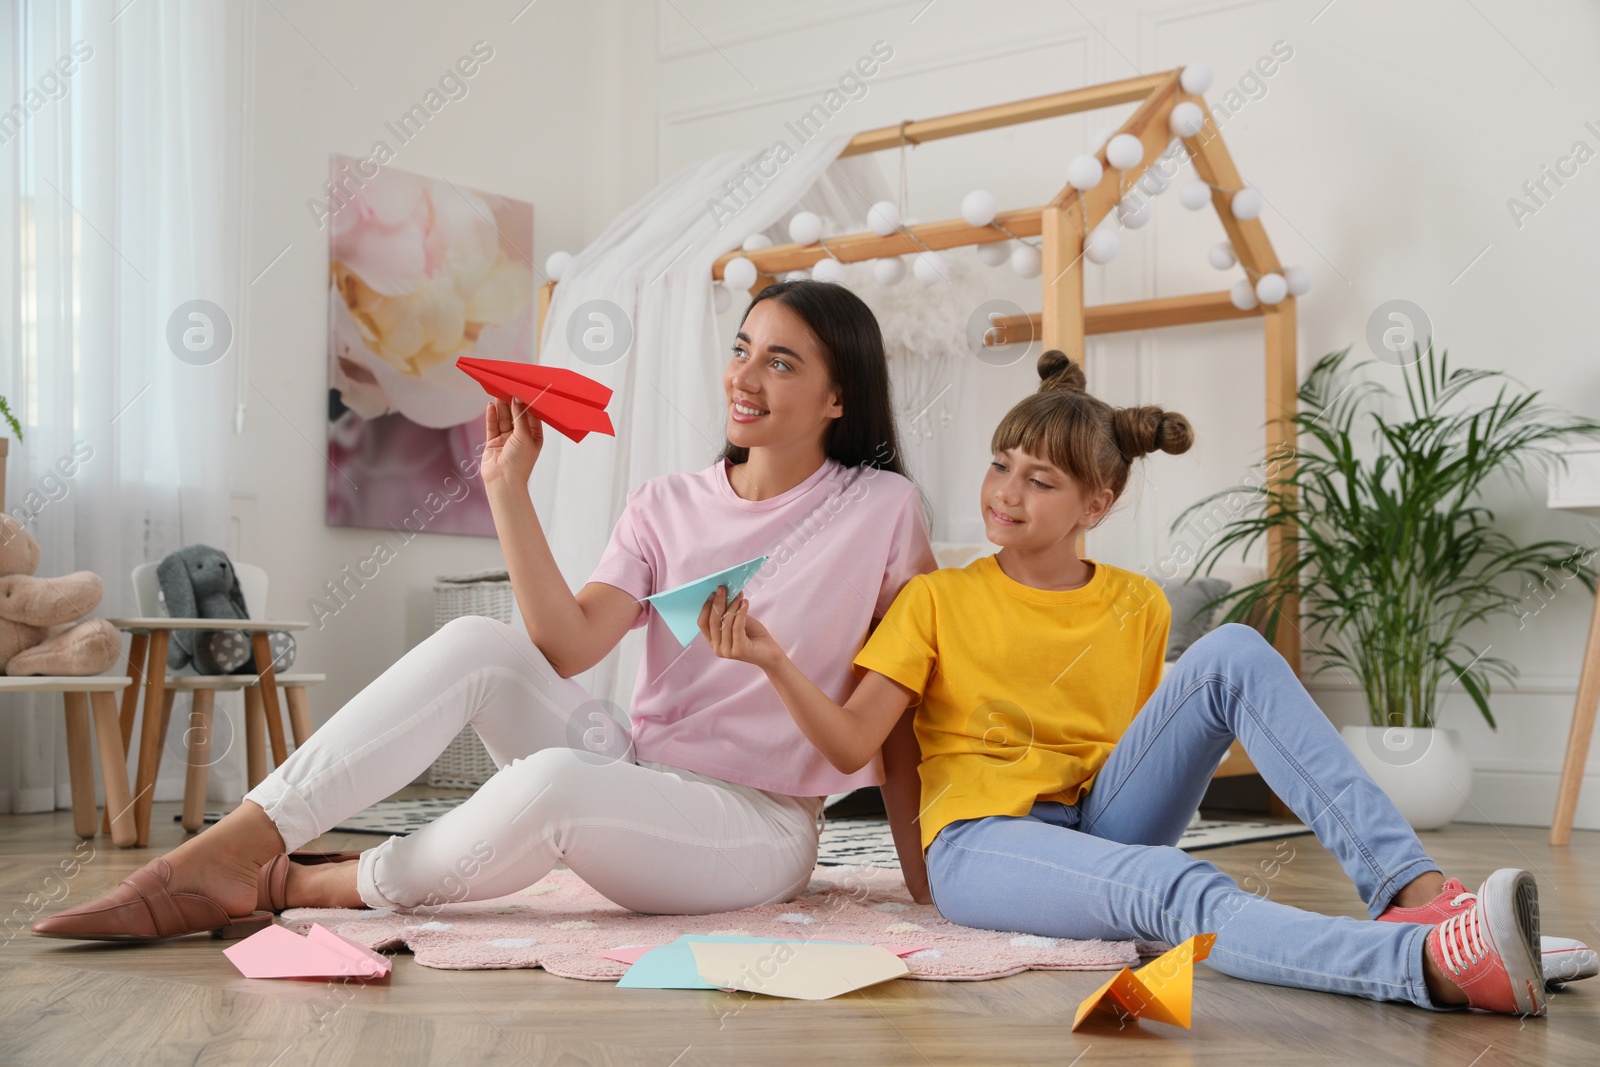 Photo of Happy mother and daughter playing with paper planes on floor in room